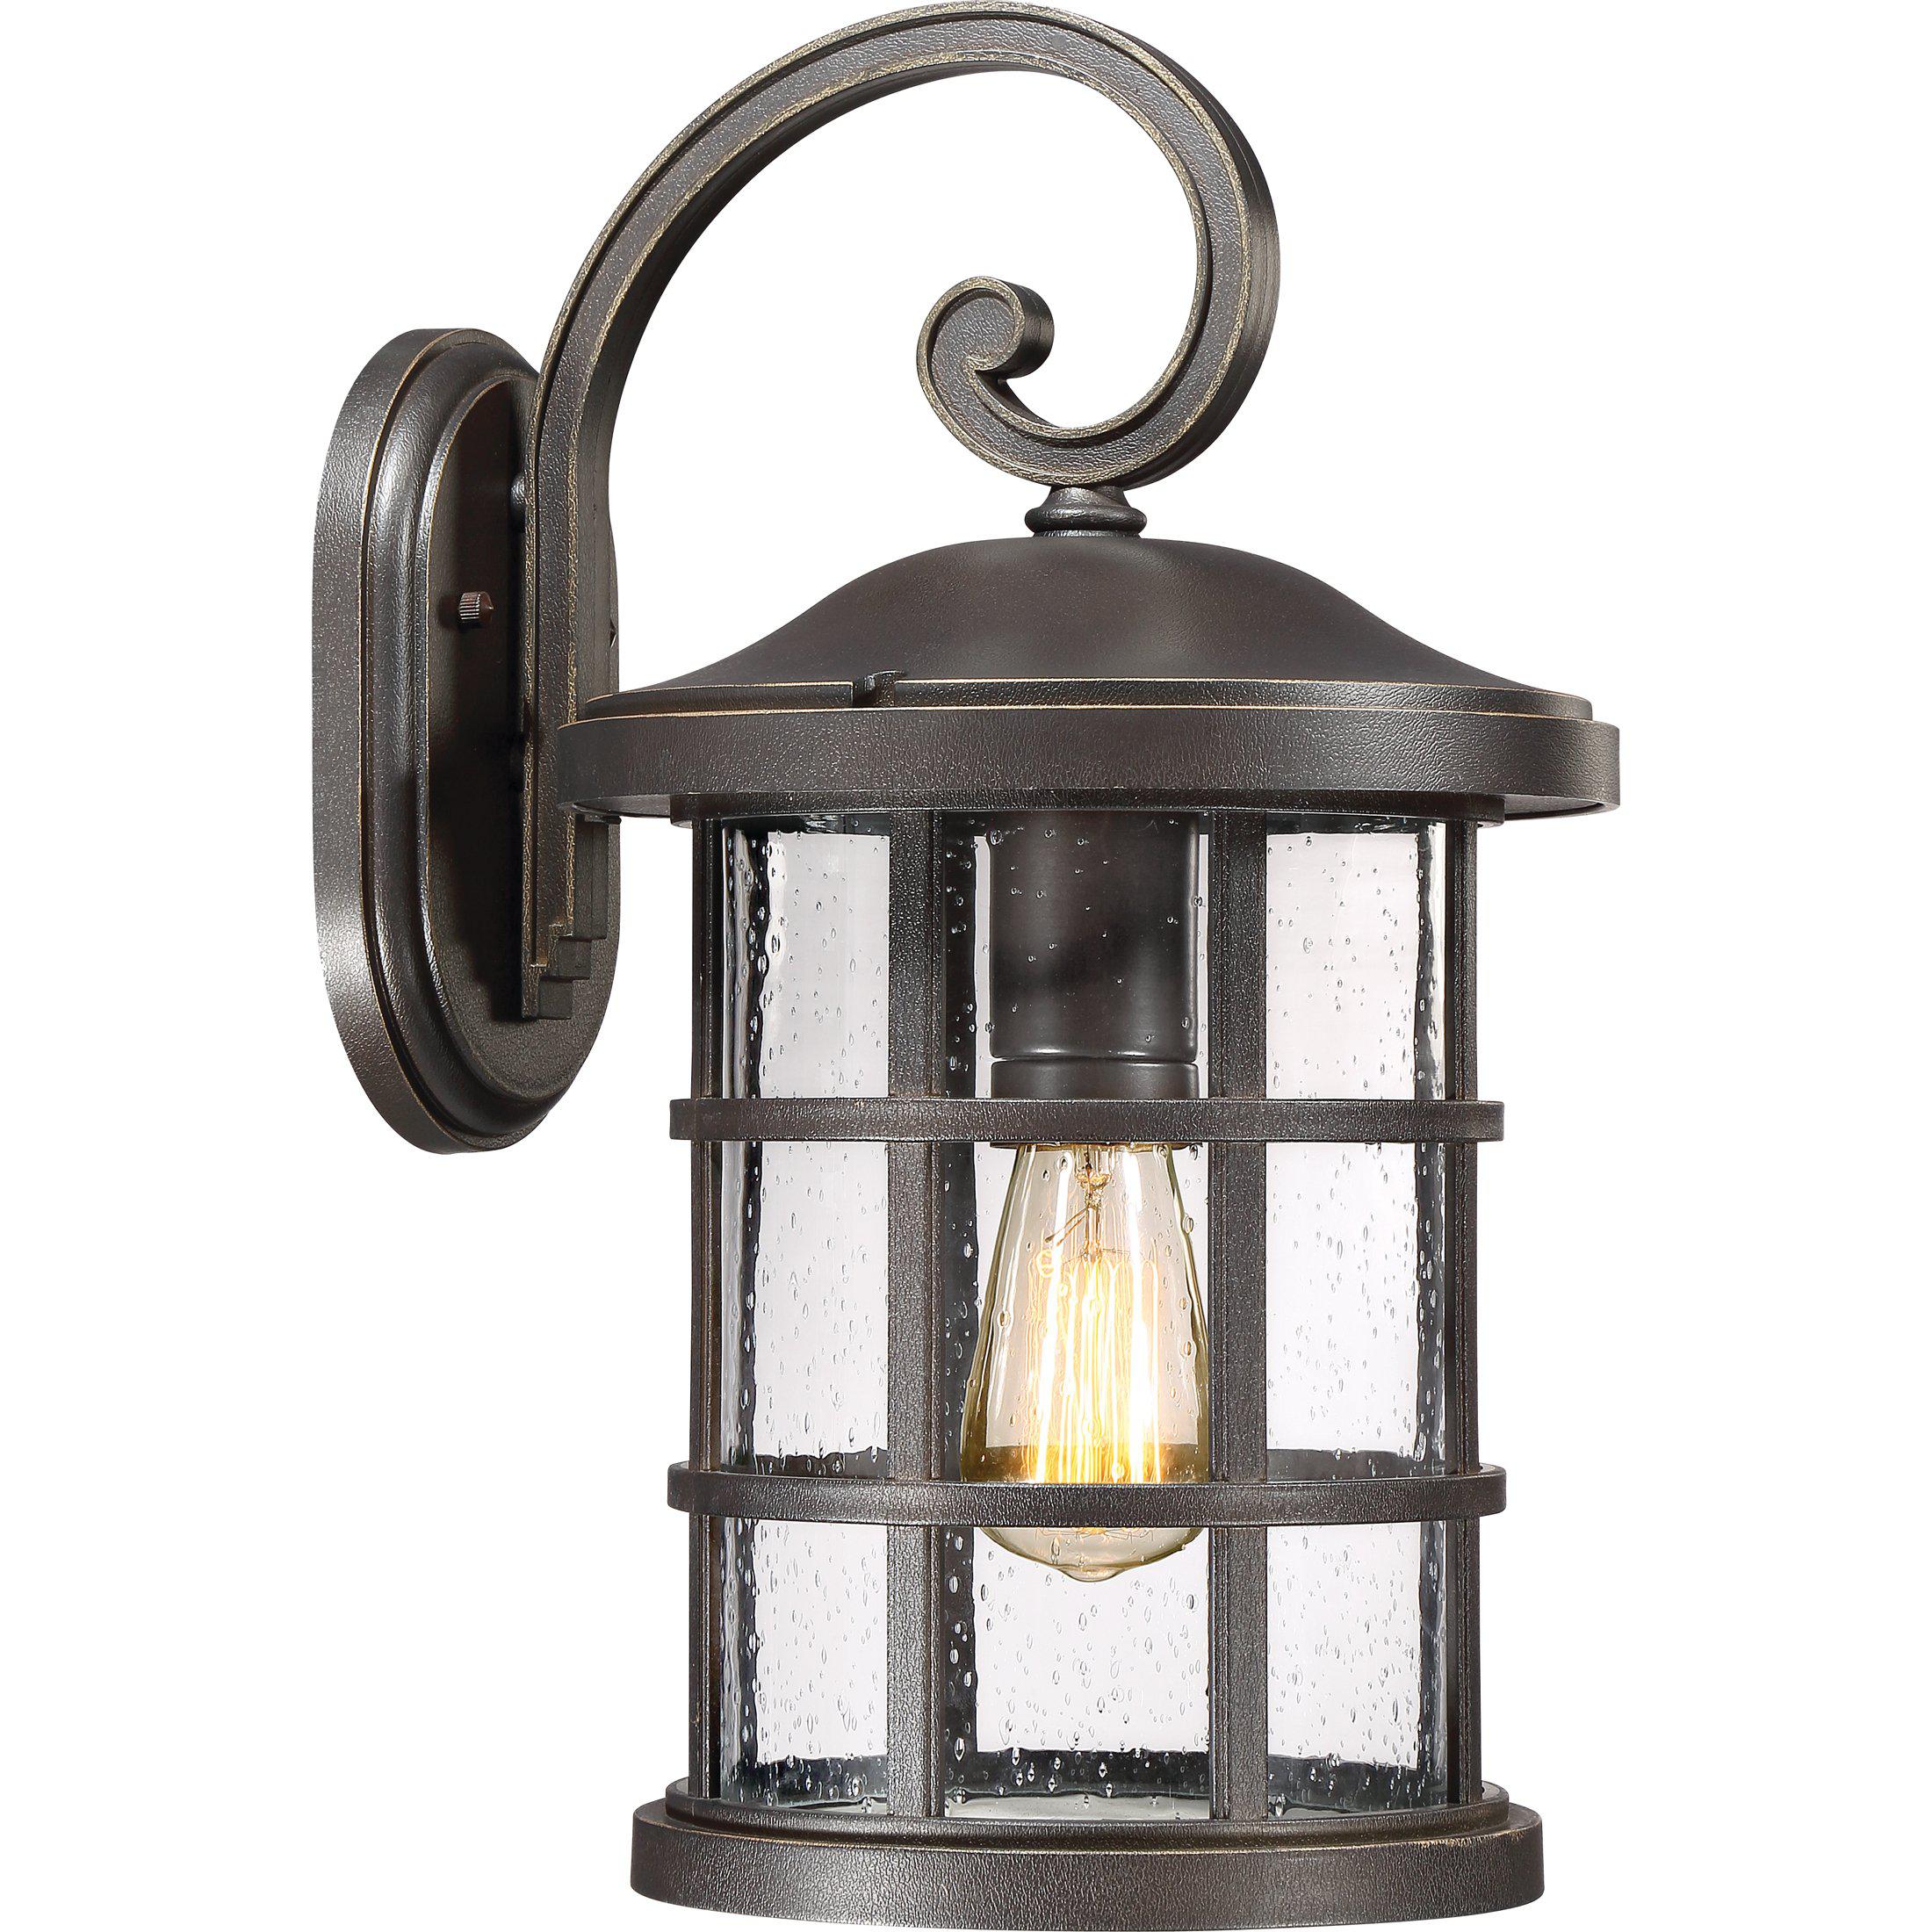 Quoizel  Crusade Outdoor Lantern, Large Outdoor l Wall Quoizel Palladian Bronze  